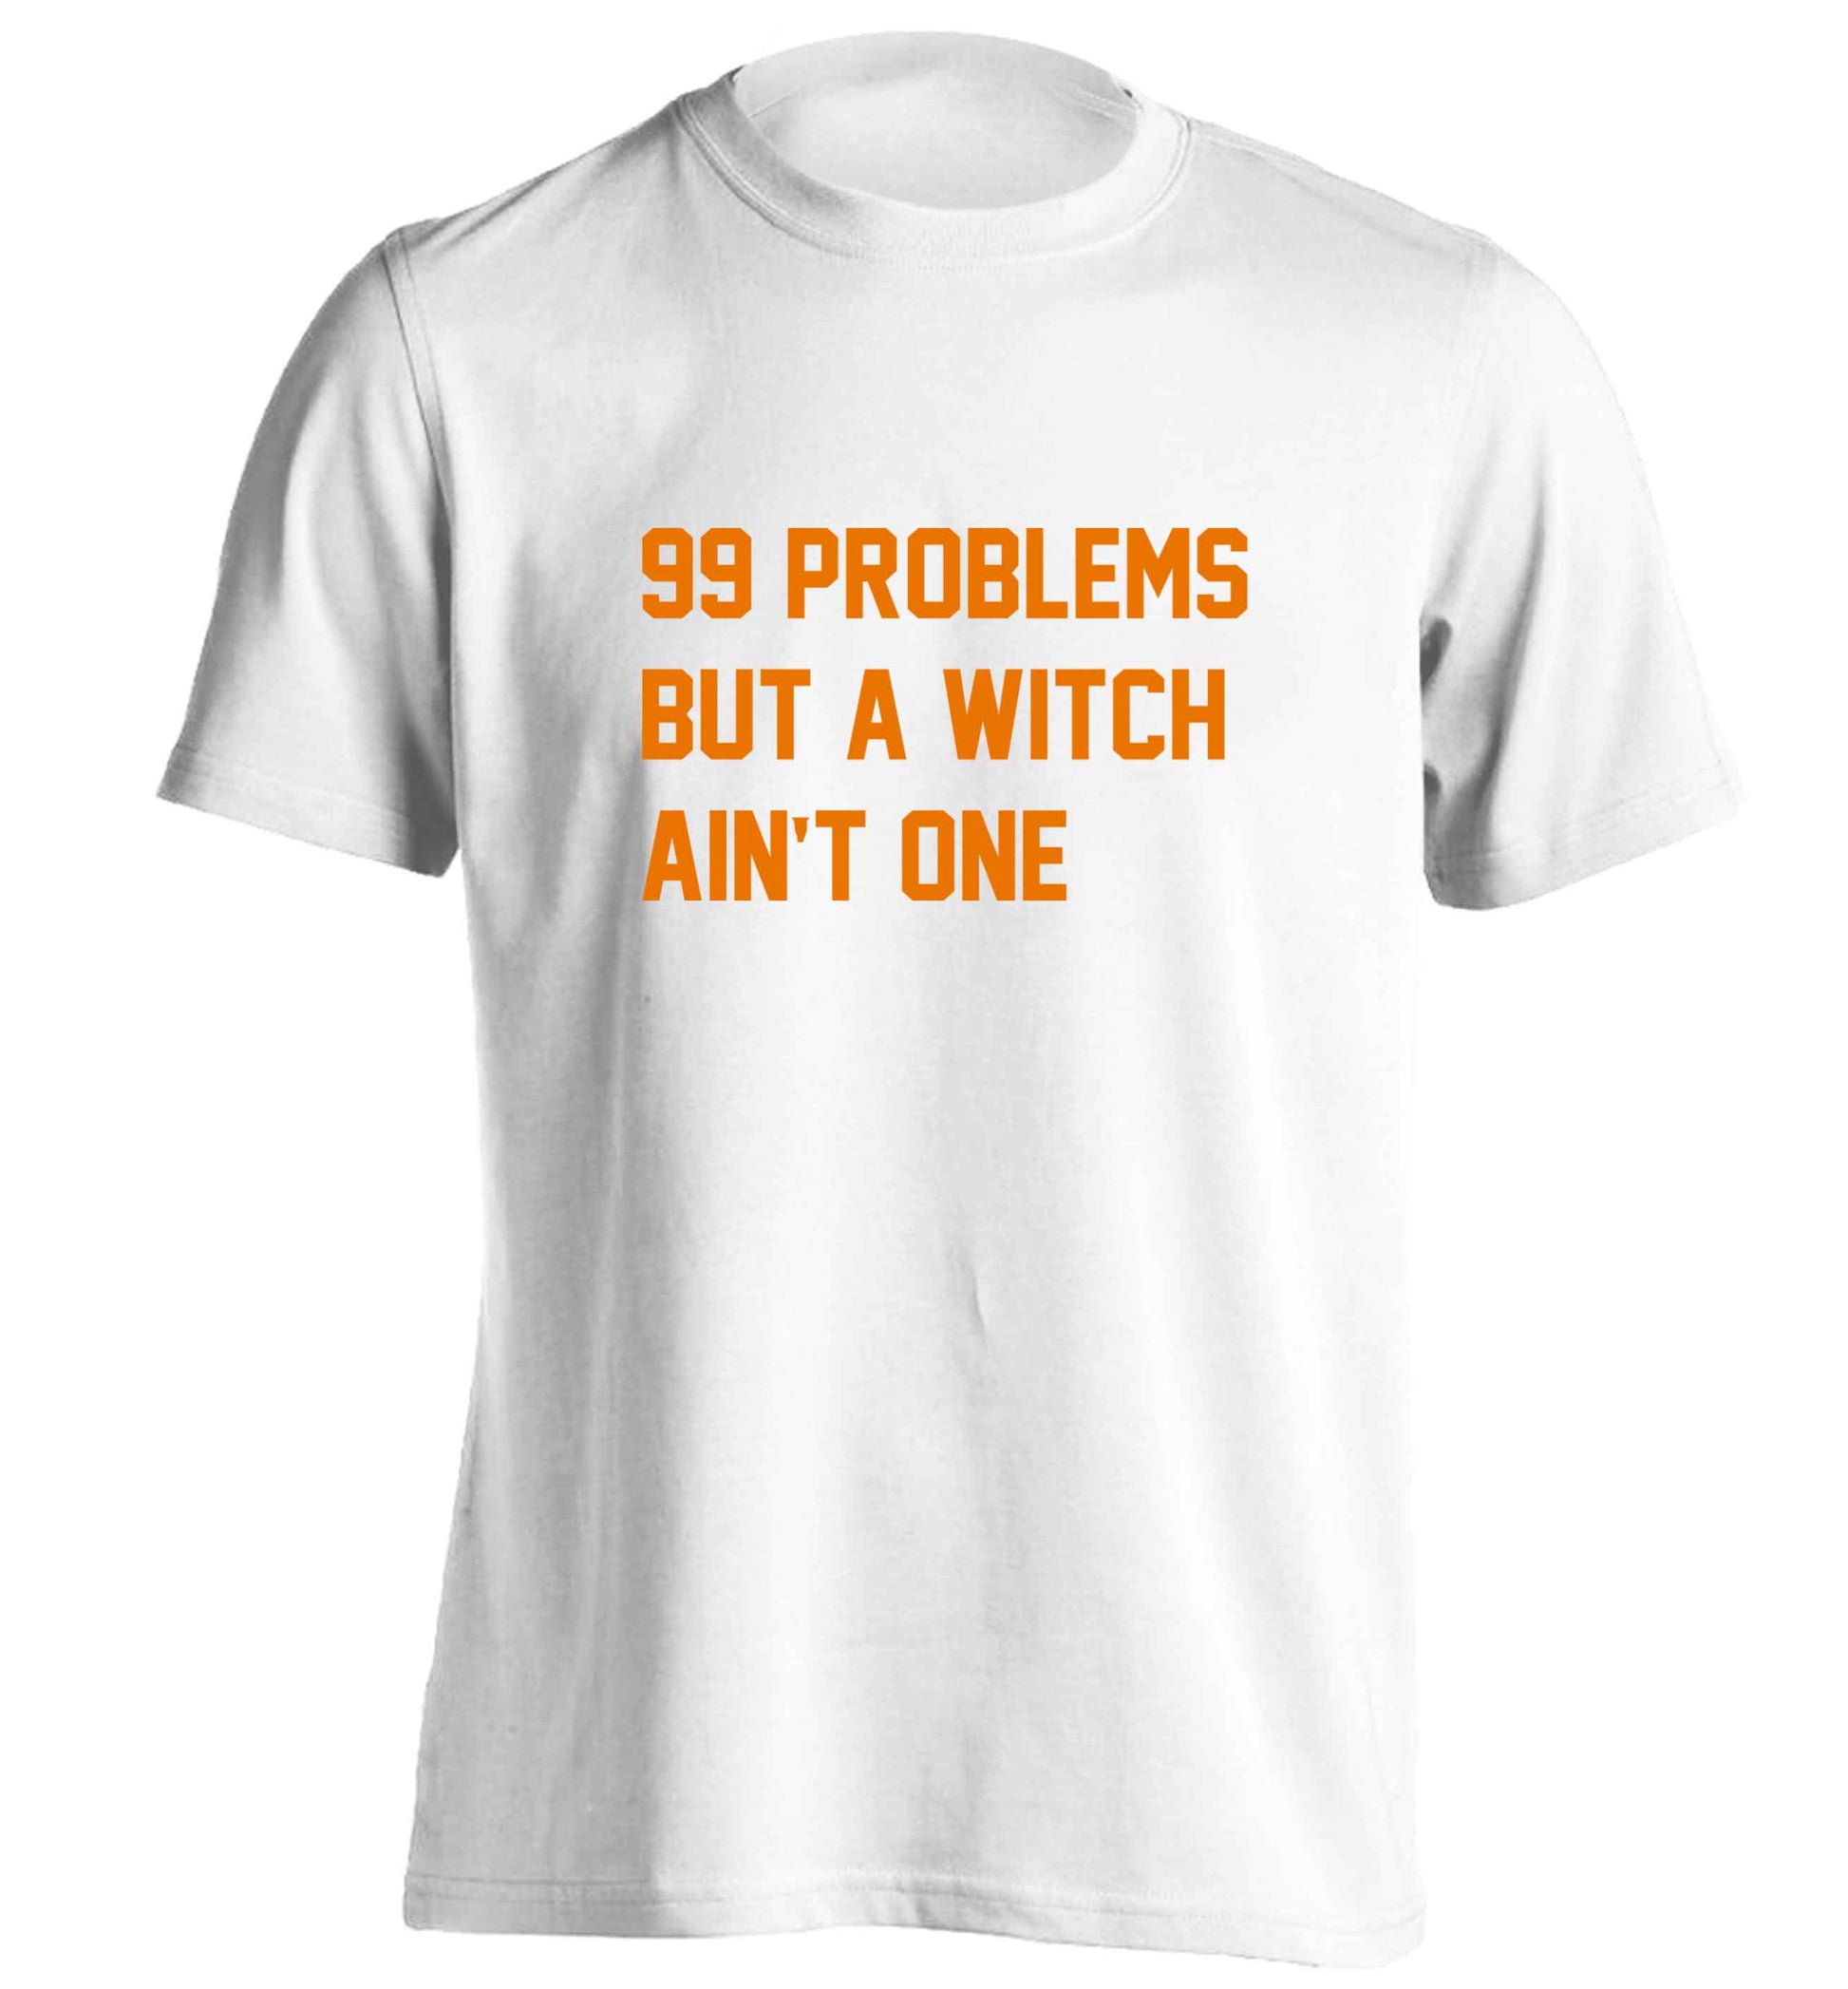 99 Problems but a witch aint one adults unisex white Tshirt 2XL